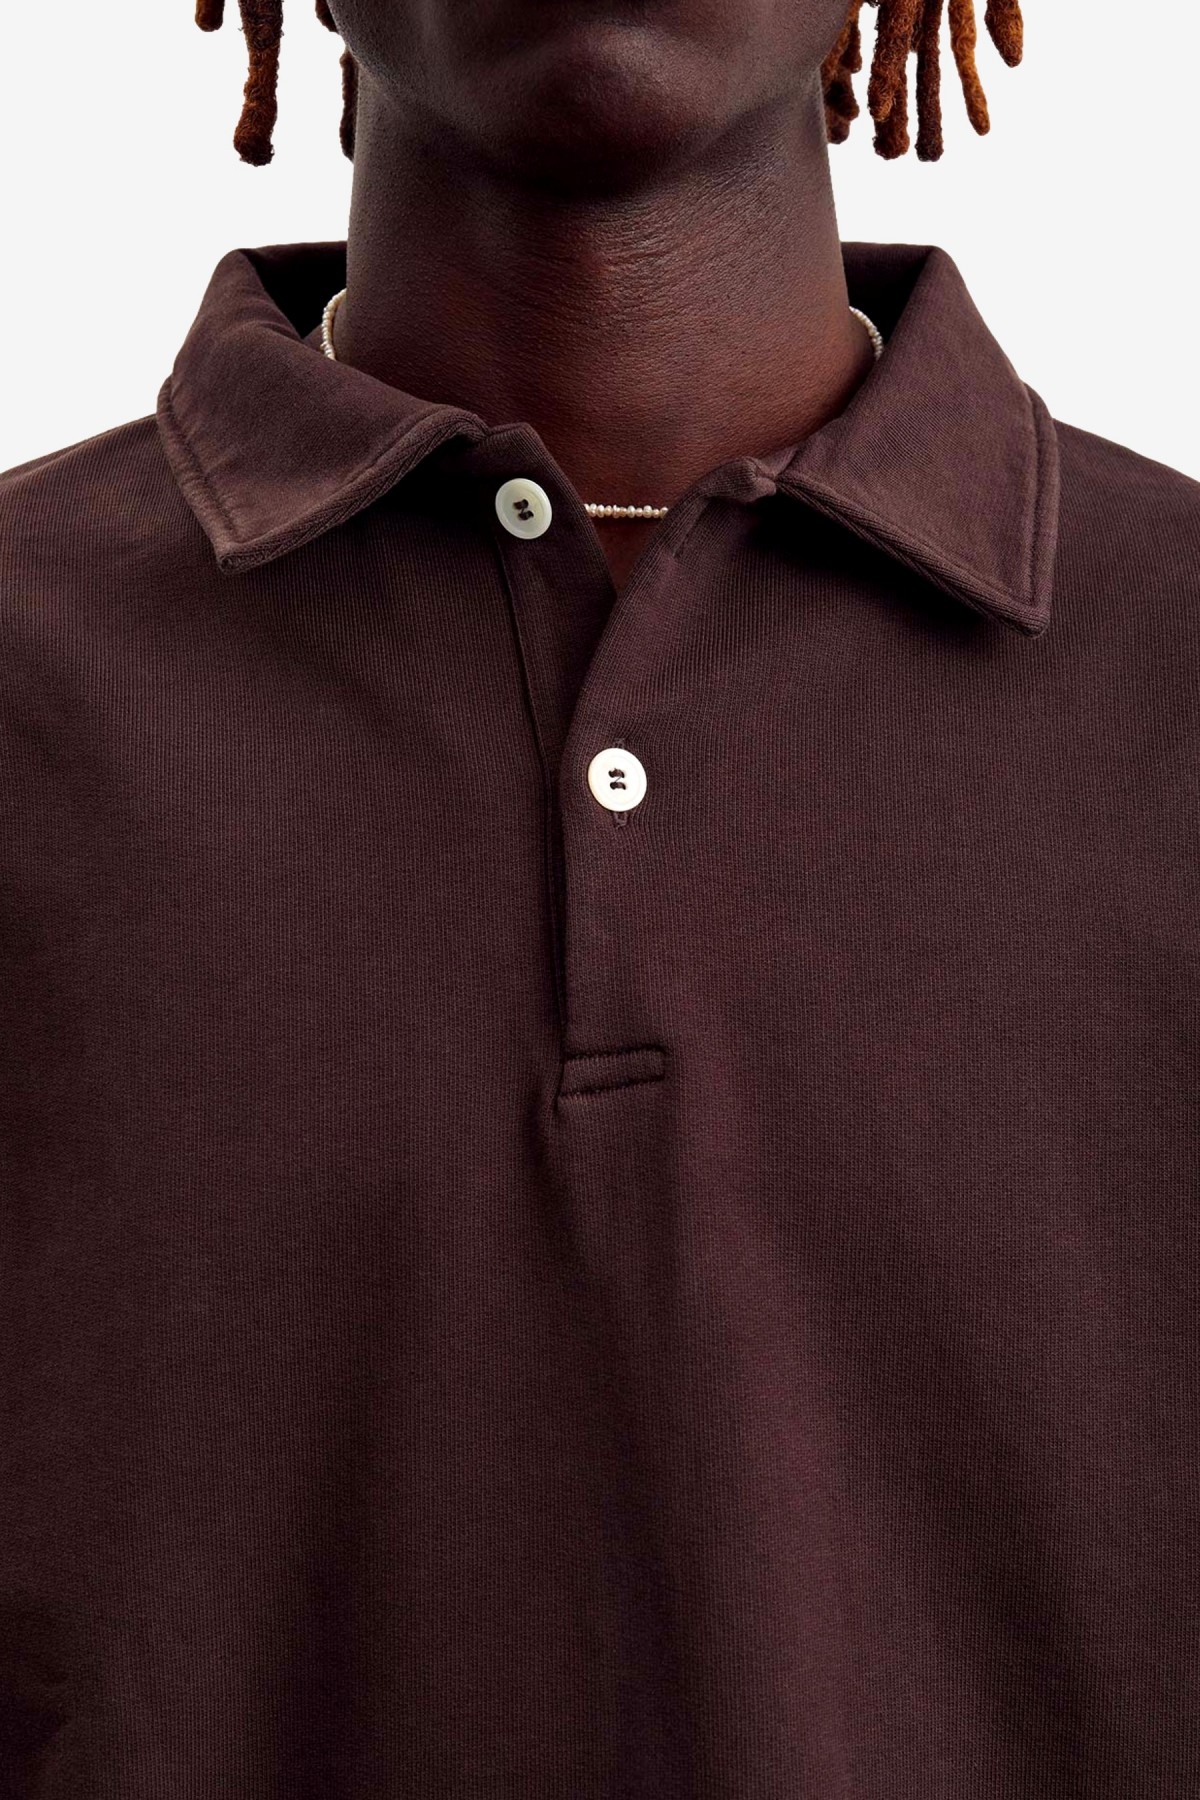 Another Aspect Polo Shirt 1.0 in Antique Brown